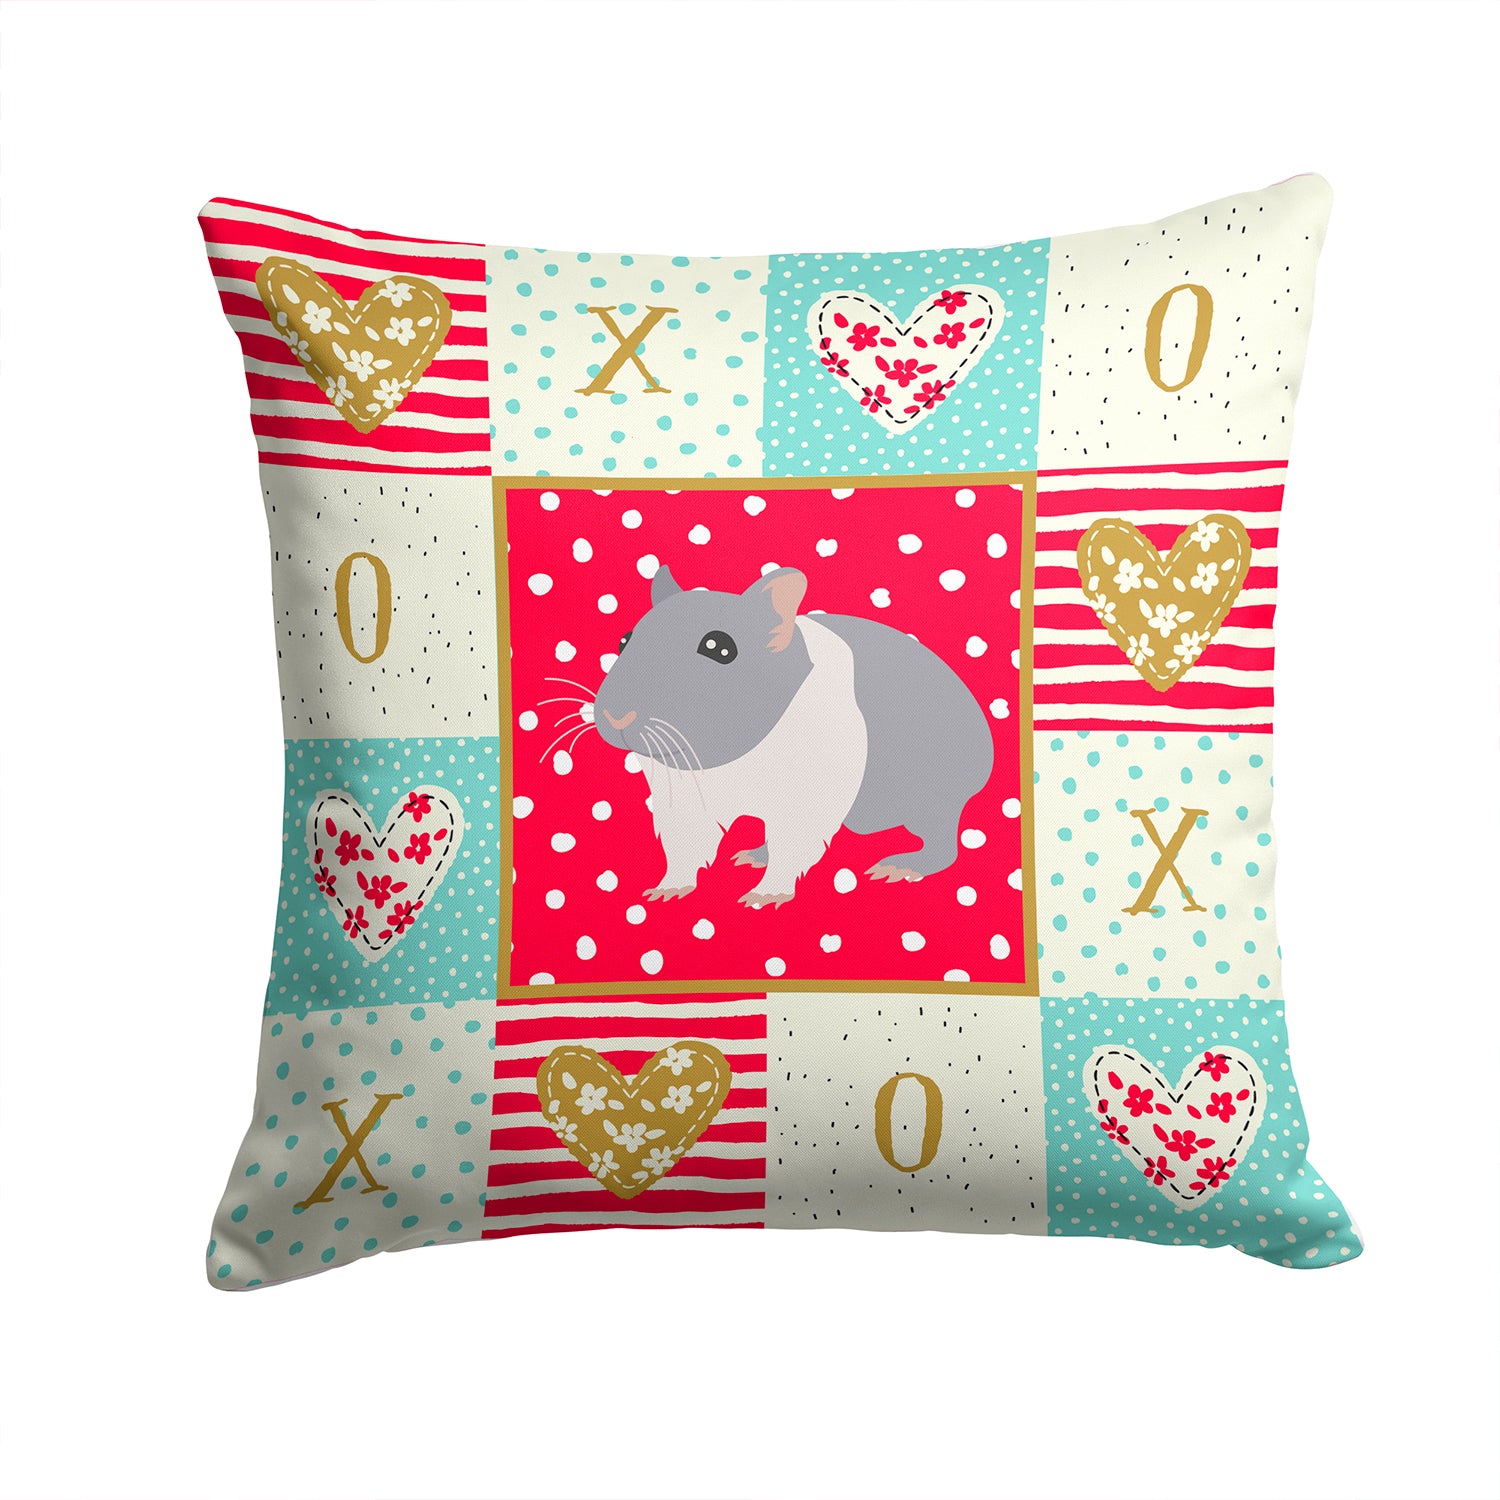 South African Hamster Love Fabric Decorative Pillow CK5442PW1414 - the-store.com